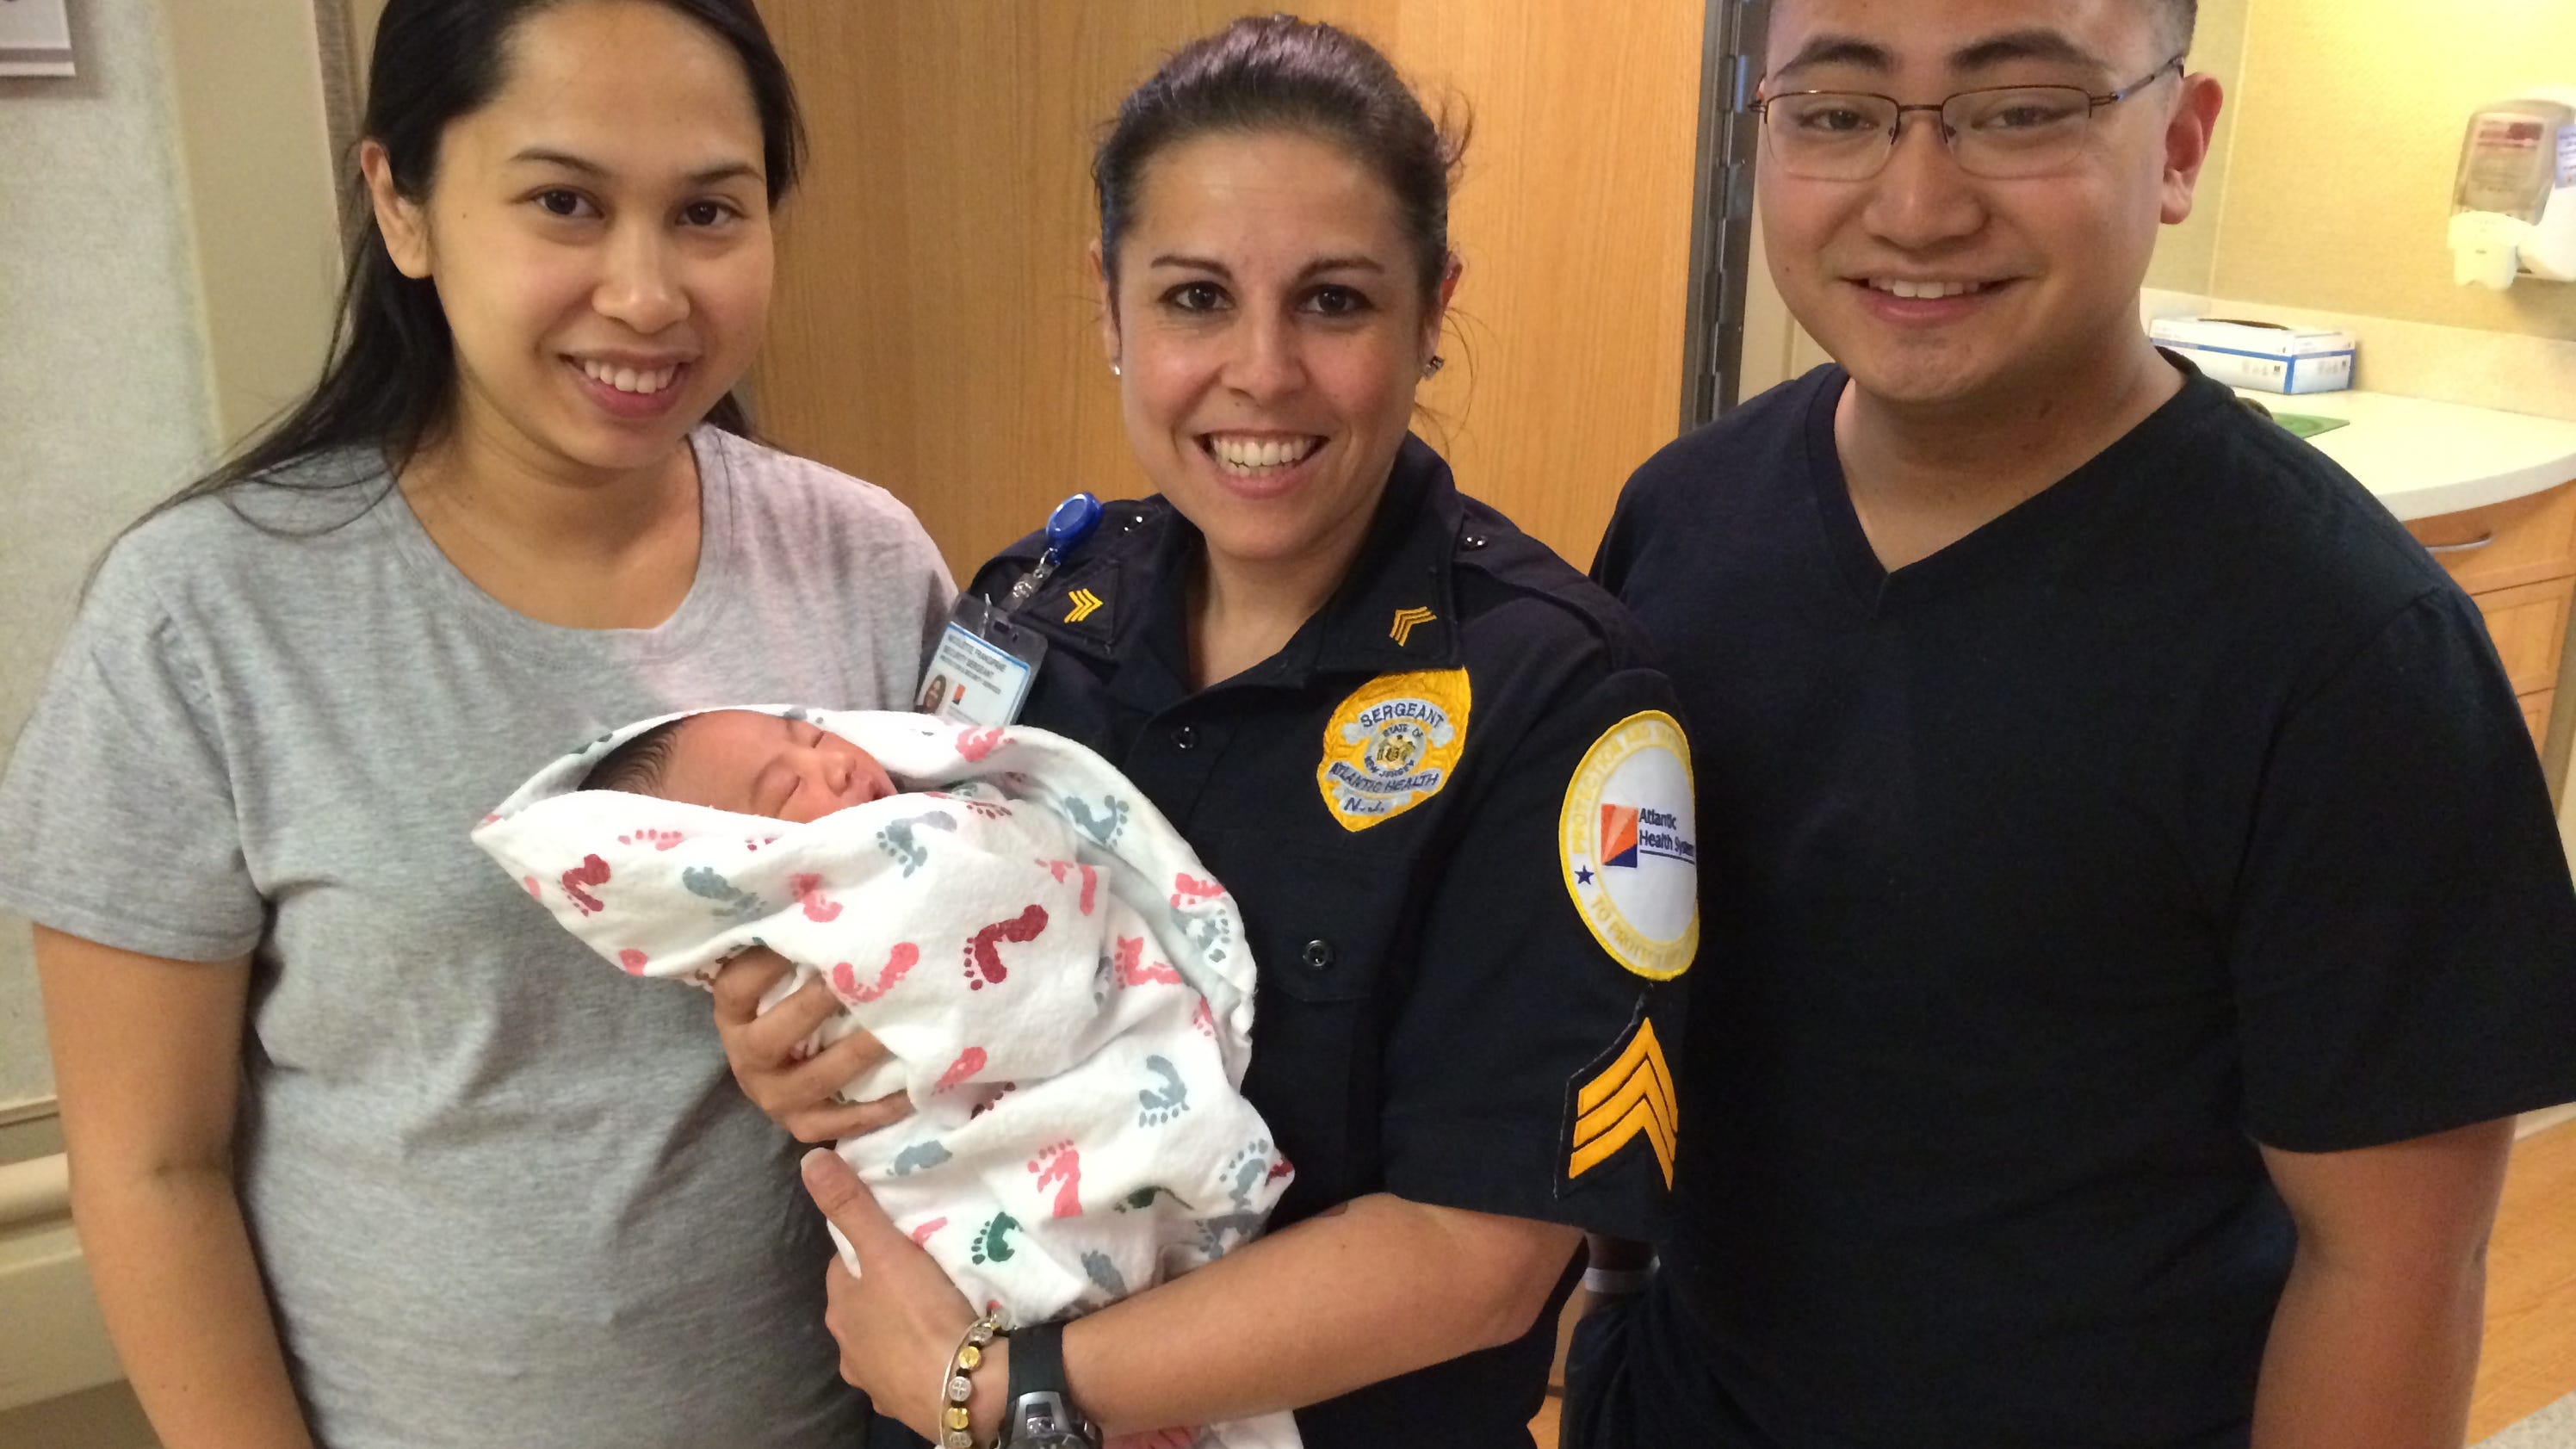 Morristown hospital security officer delivers baby3200 x 1680